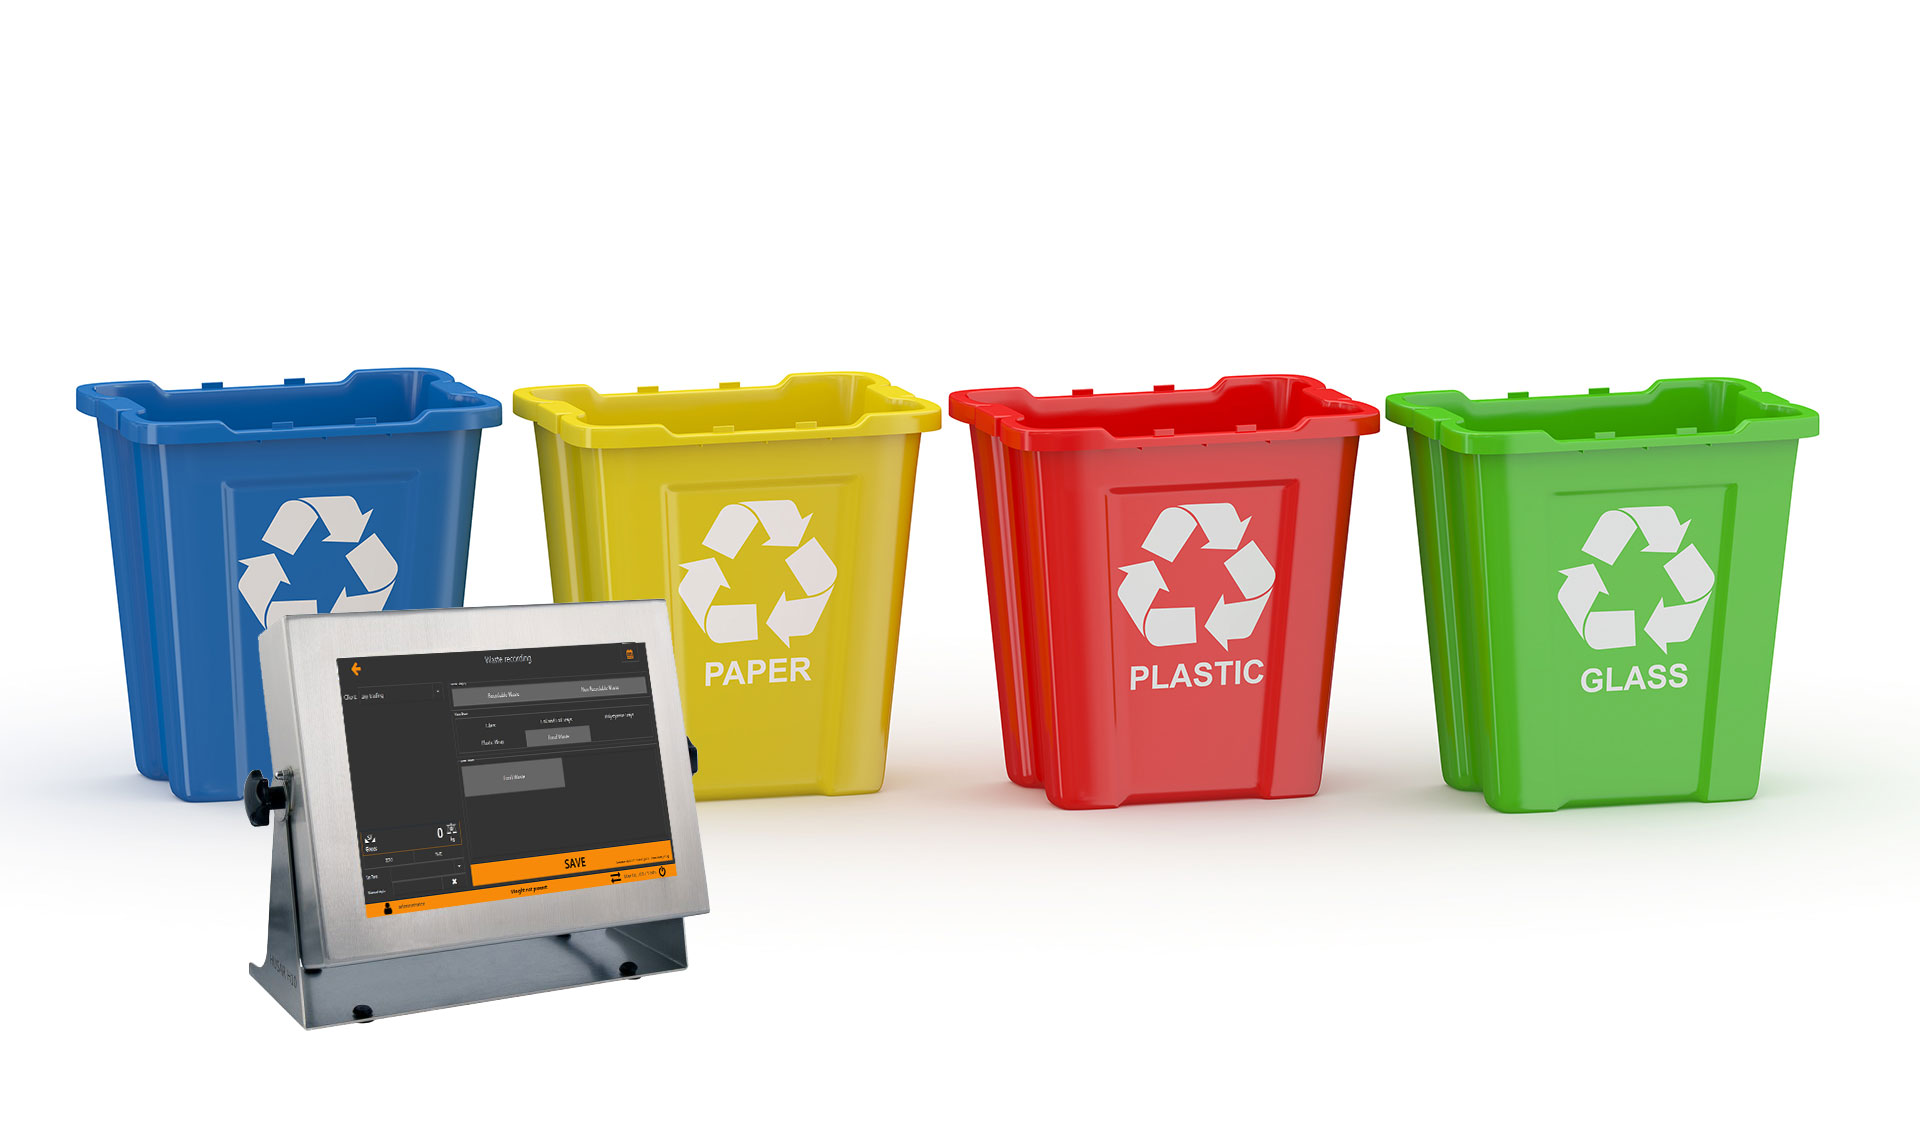 Intelligent waste management system supports waste reduction and offers tangible benefits to users